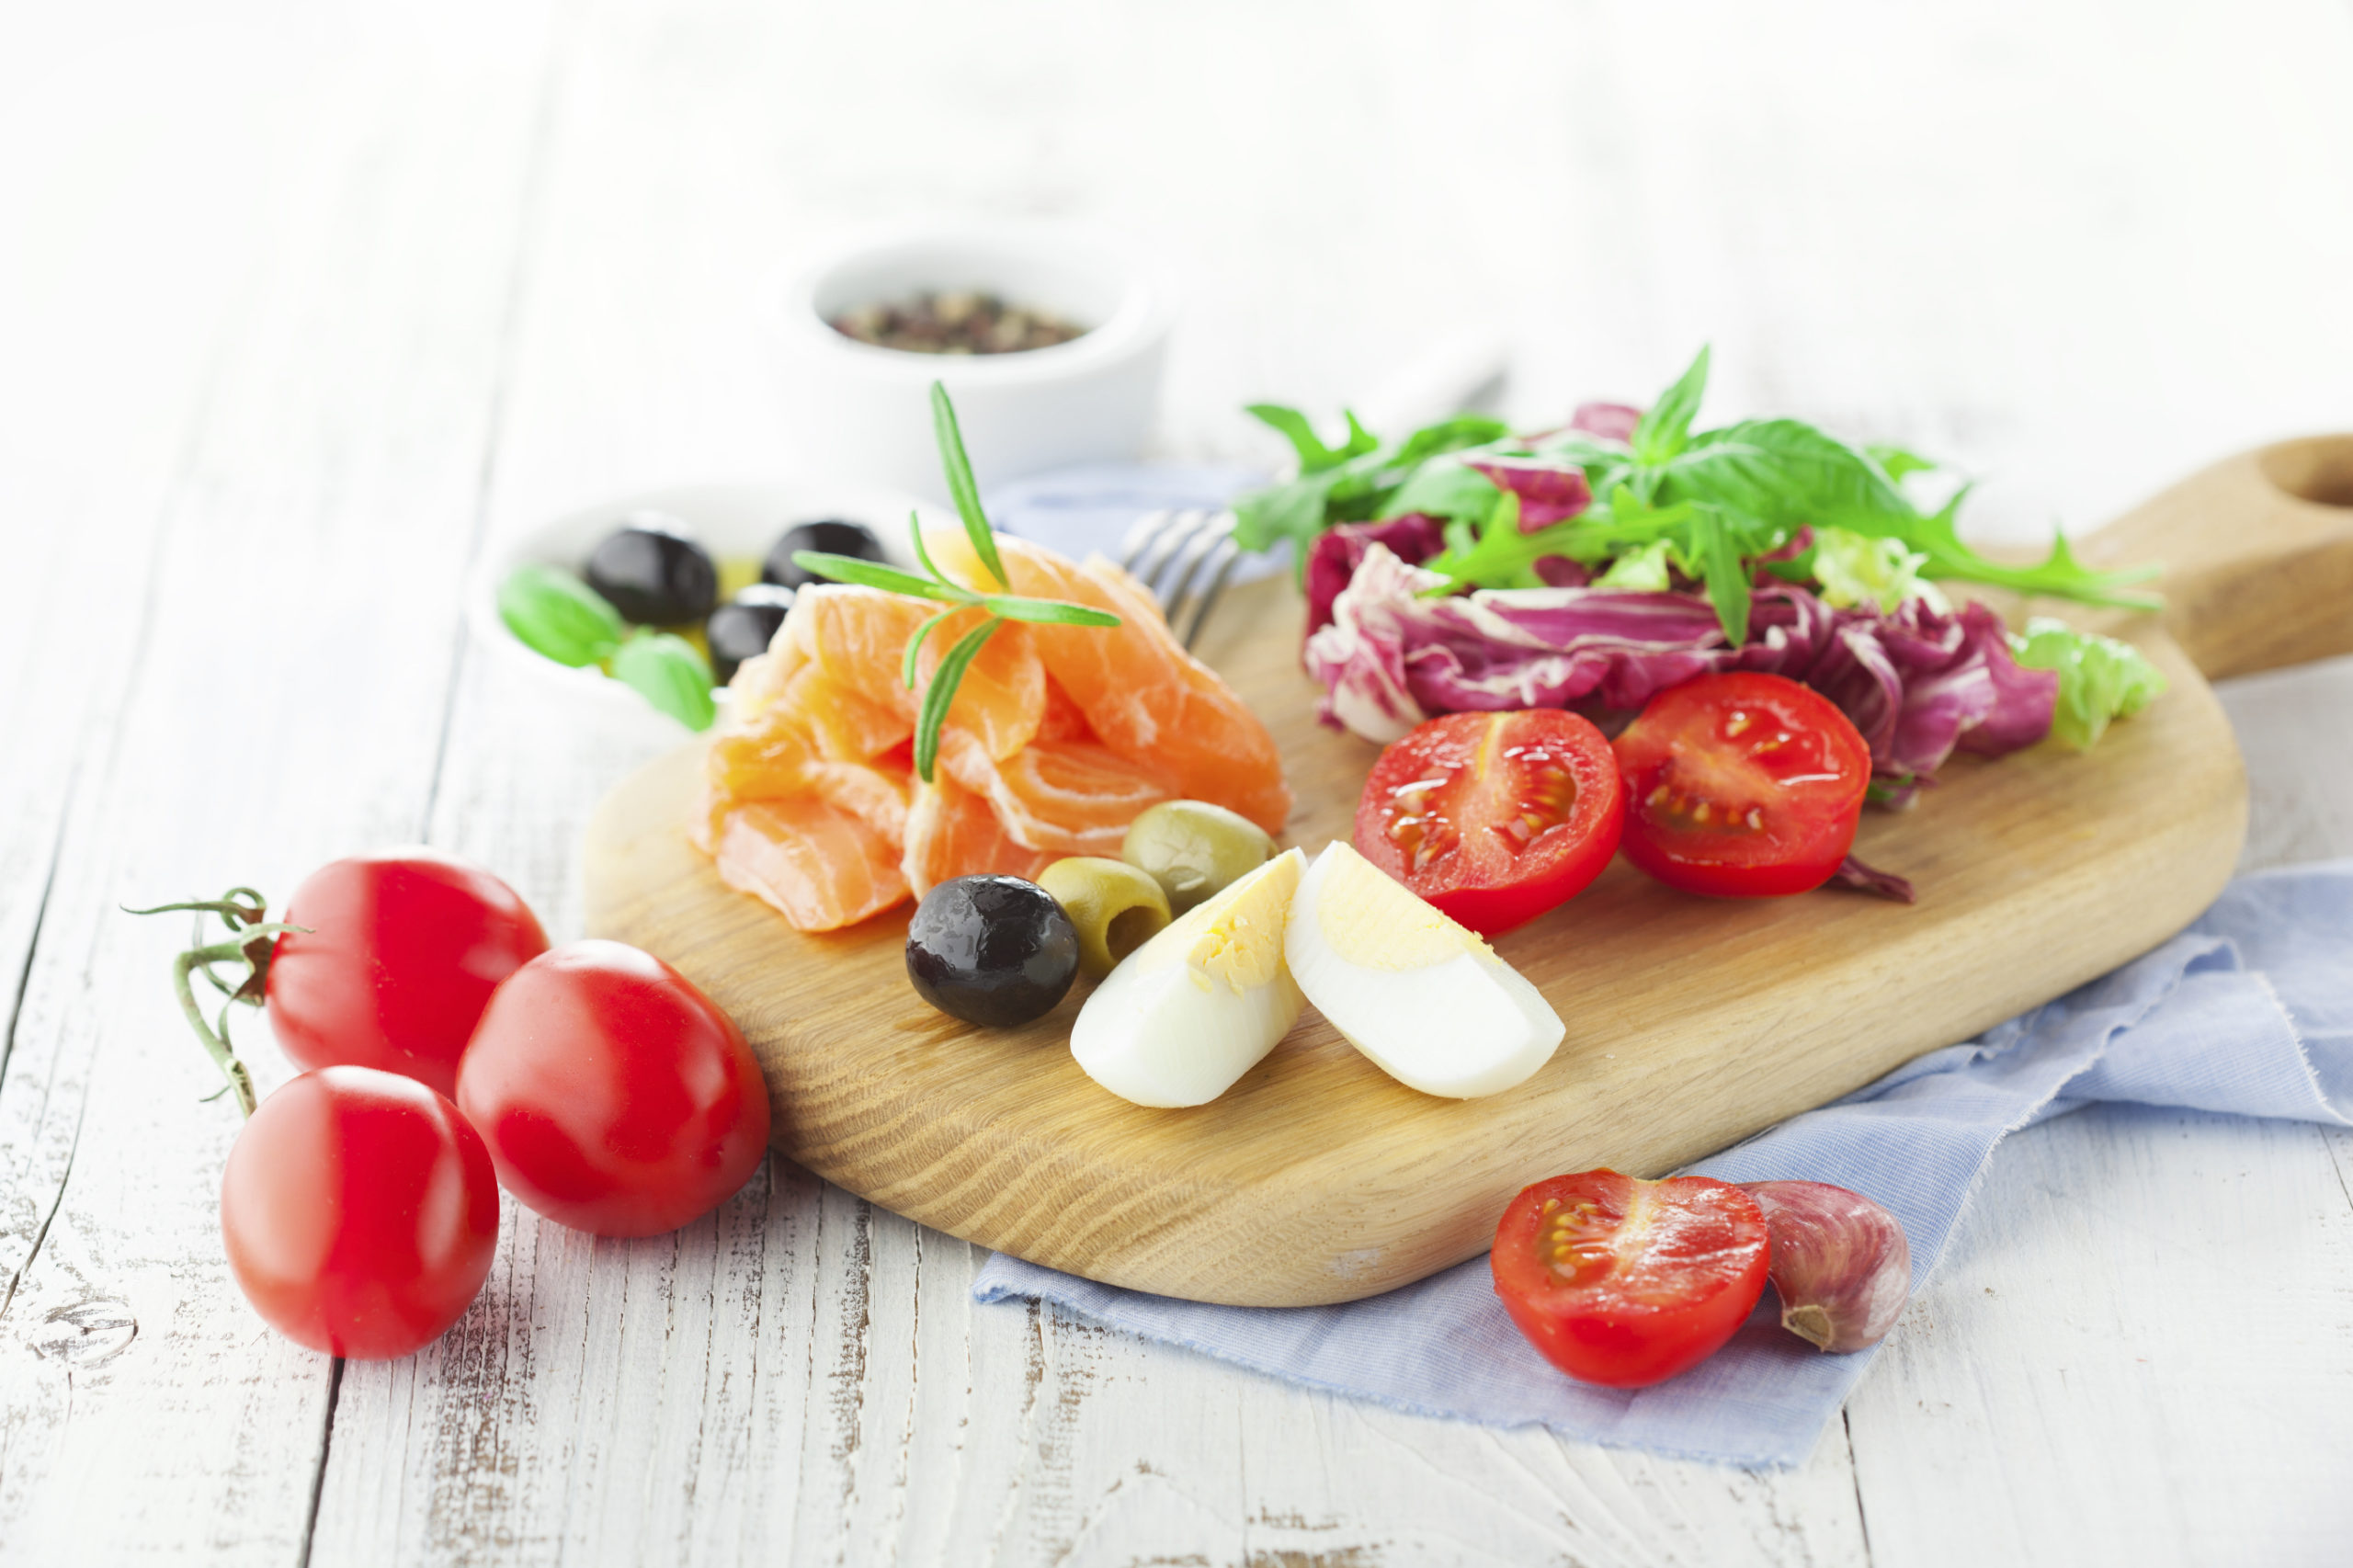 Ingredients for salad with salmon, cherry tomatoes and lettuce on a wooden chopping board on rustic white background, selective focus